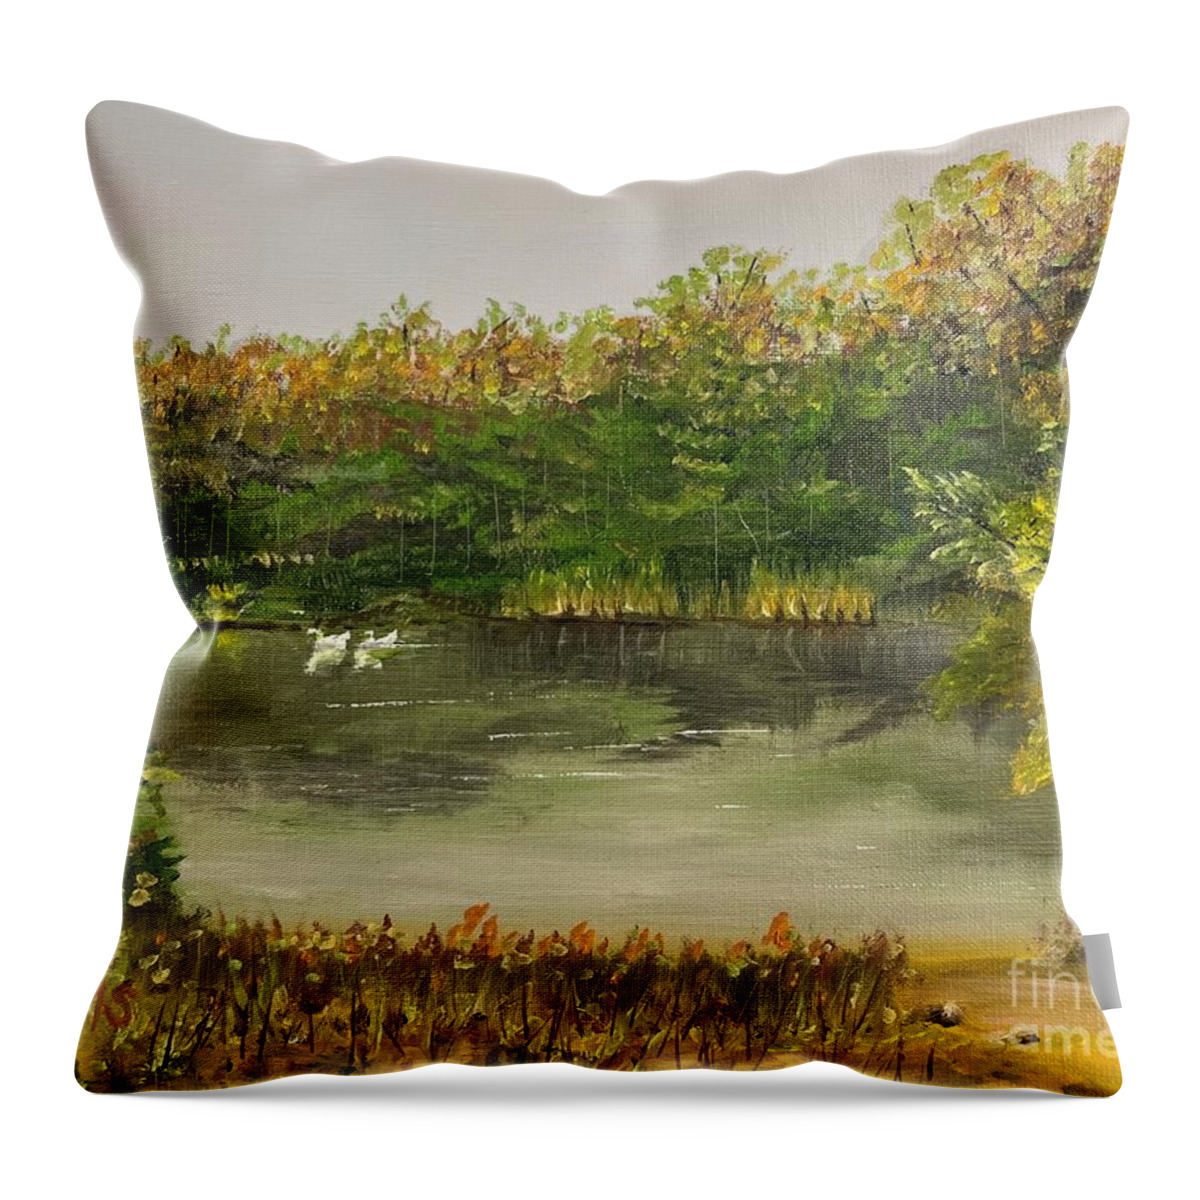 Peaceful Throw Pillow featuring the painting Mystery Pond by Monika Shepherdson